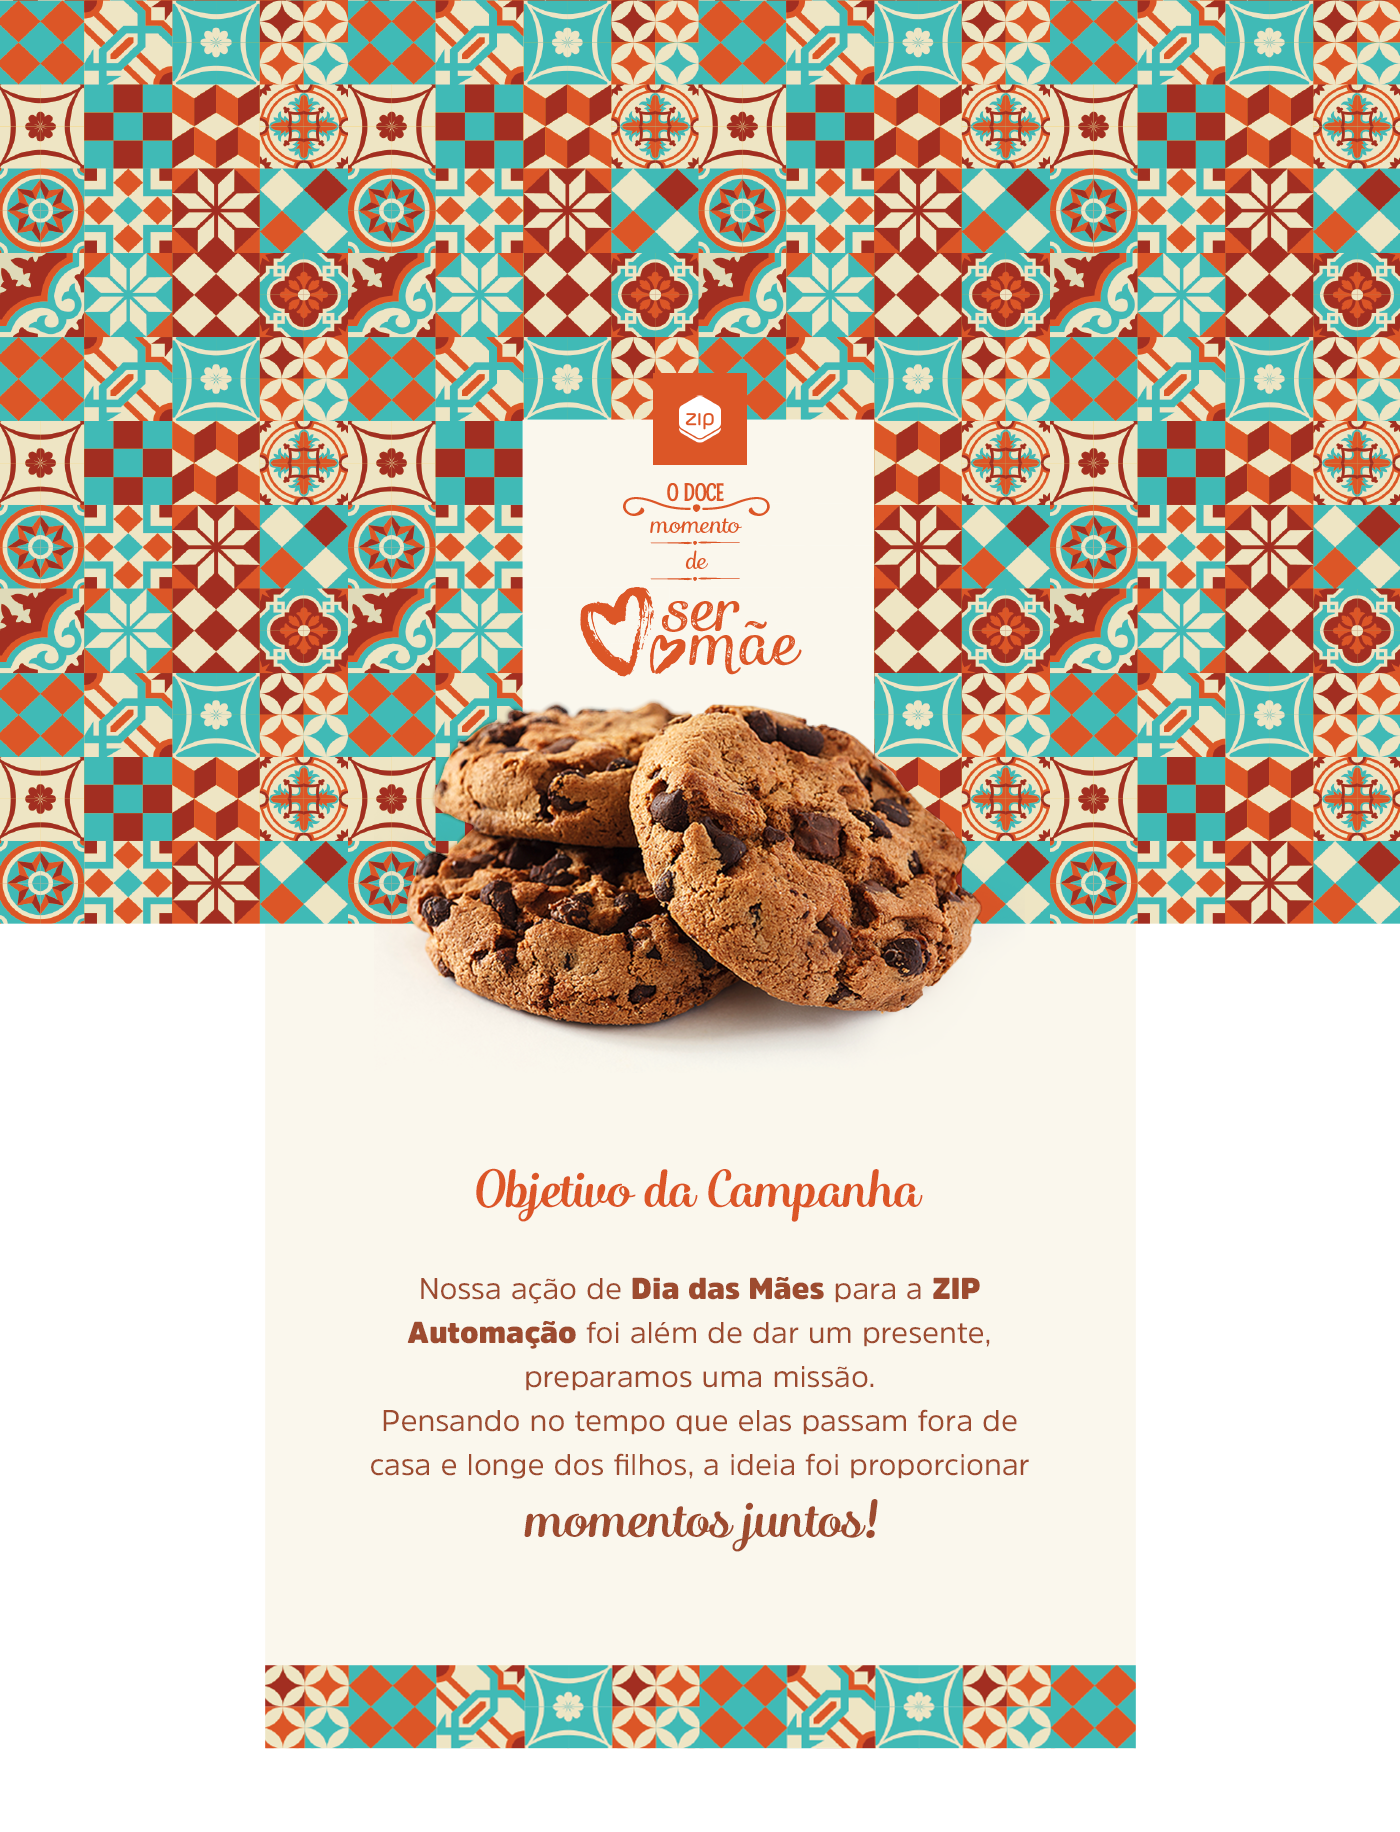 mothers day marketing   Advertising  action dia das mães endomarketing branding  cookie card Food 